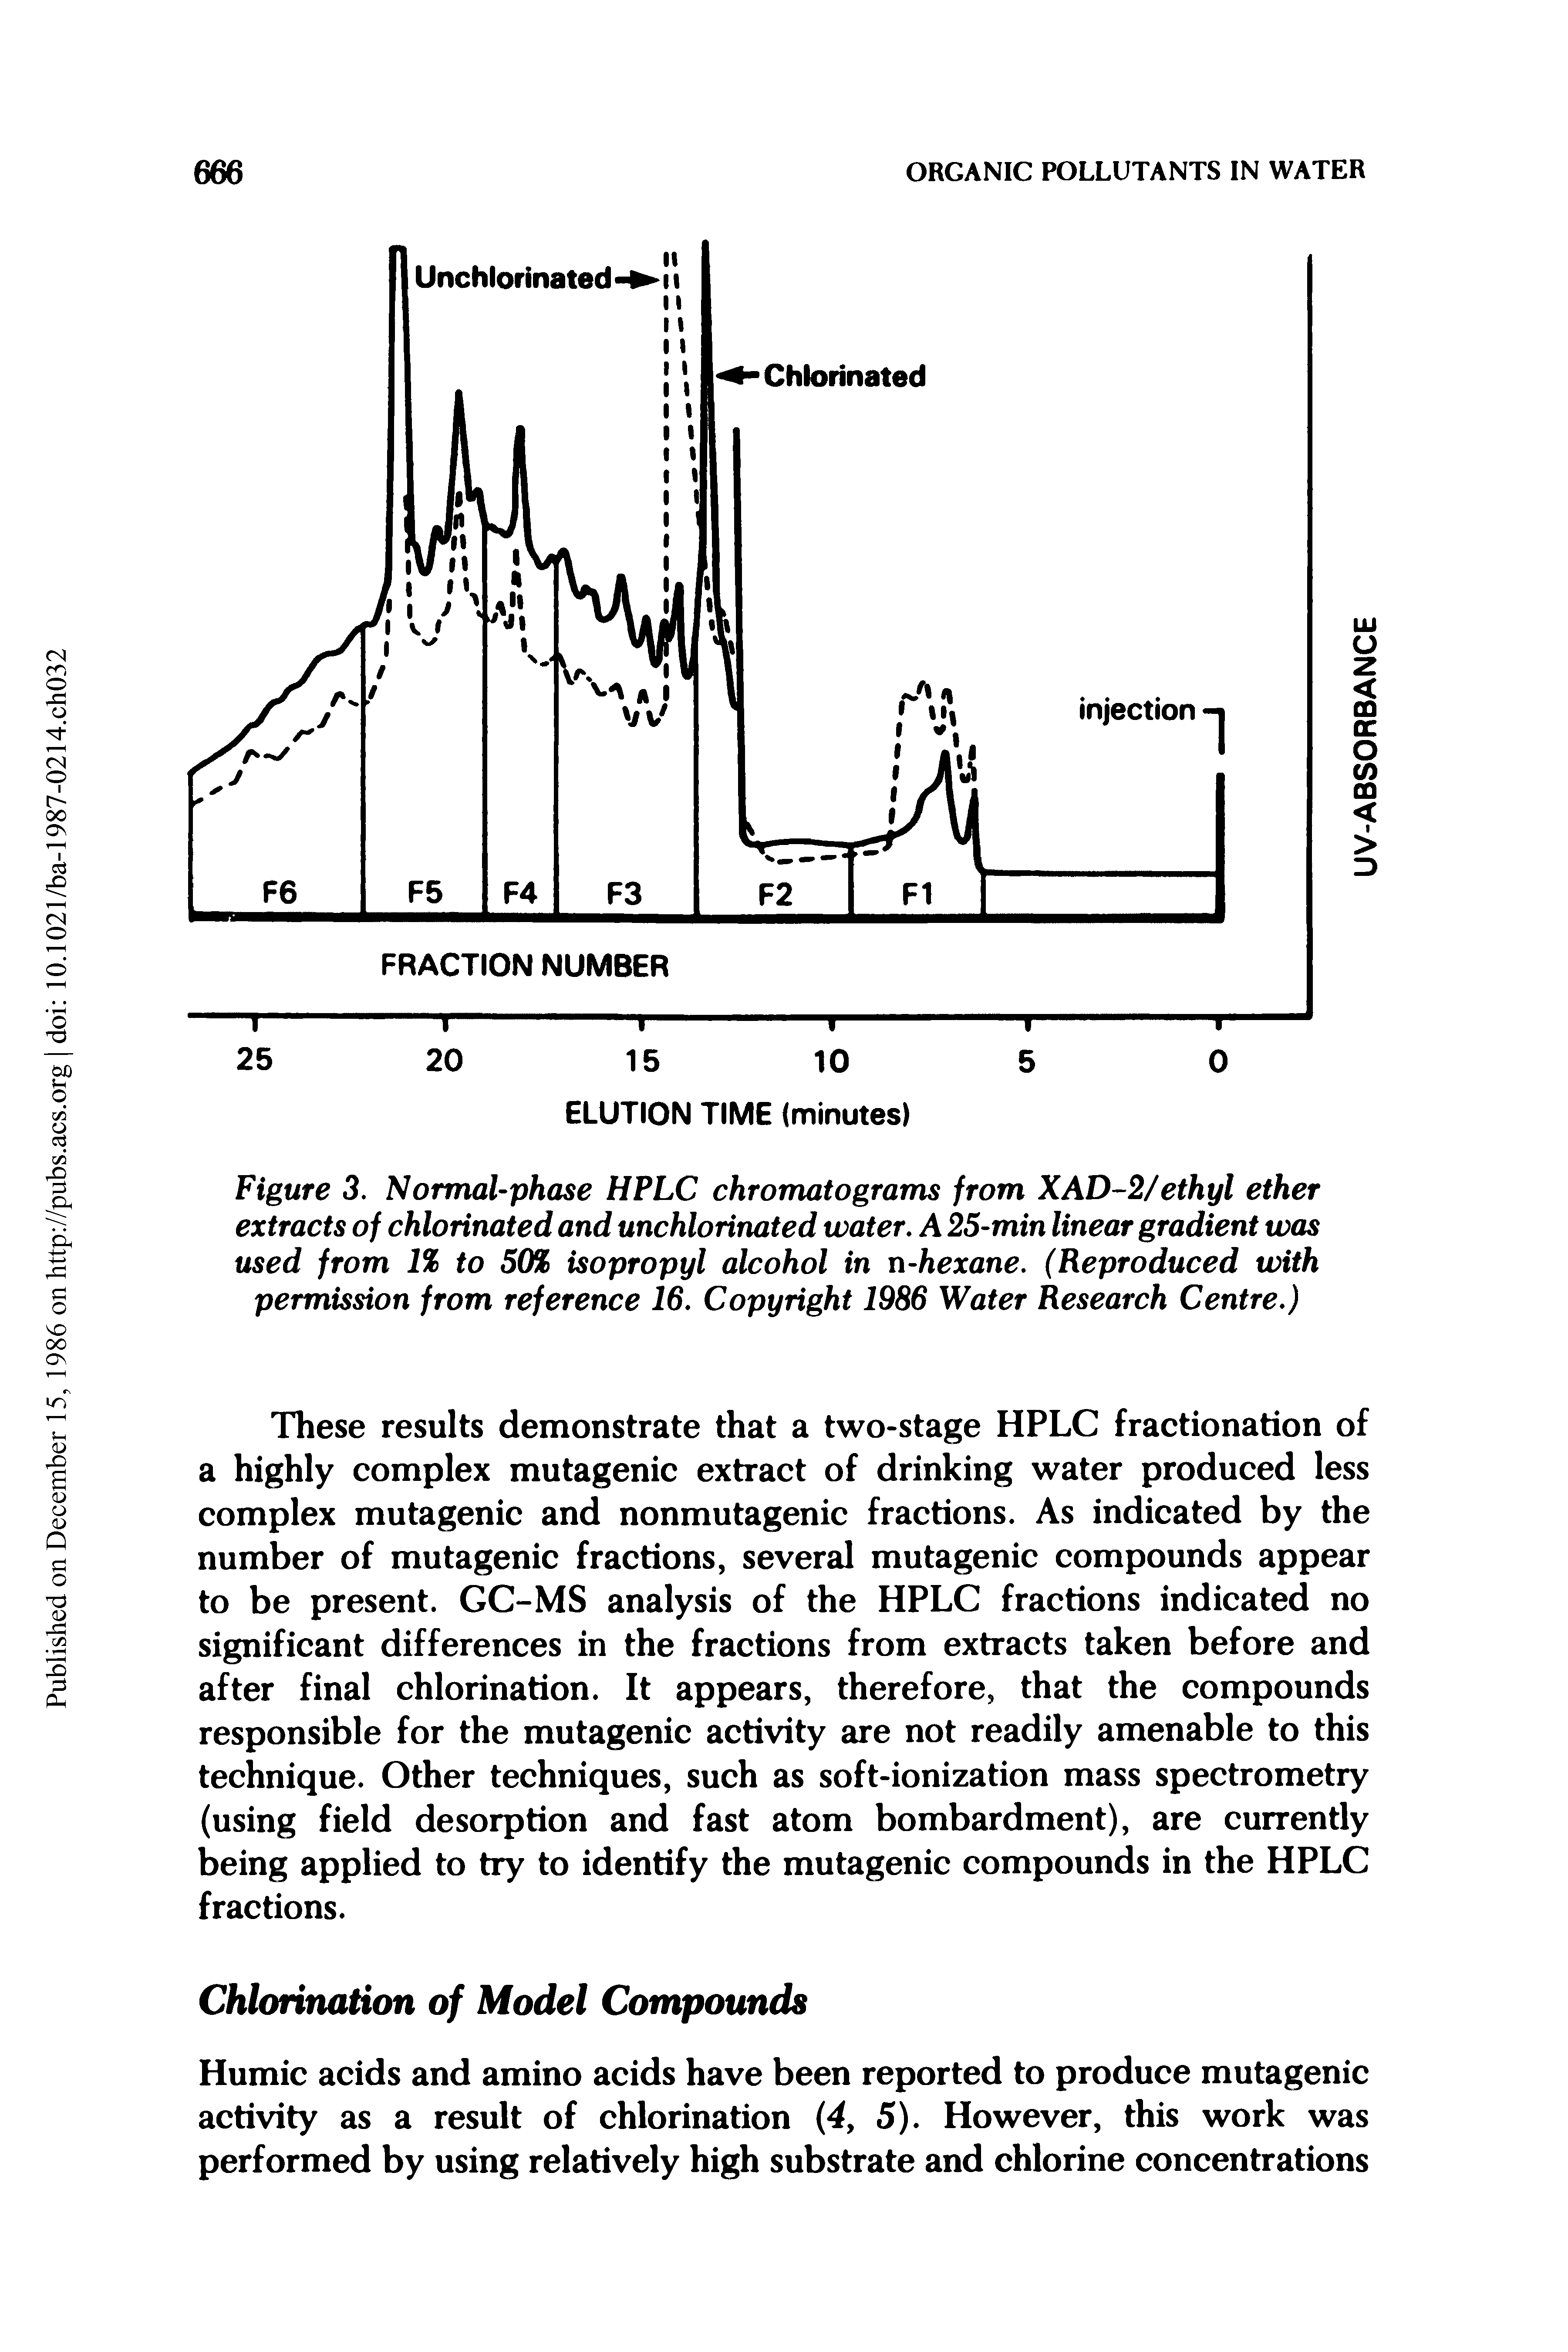 Figure 3. Normal-phase HPLC chromatograms from XAD-2/ethyl ether extracts of chlorinated and unchlorinated water. A 25-min linear gradient was used from 1% to 50% isopropyl alcohol in n-hexane. (Reproduced with permission from reference 16. Copyright 1986 Water Research Centre.)...